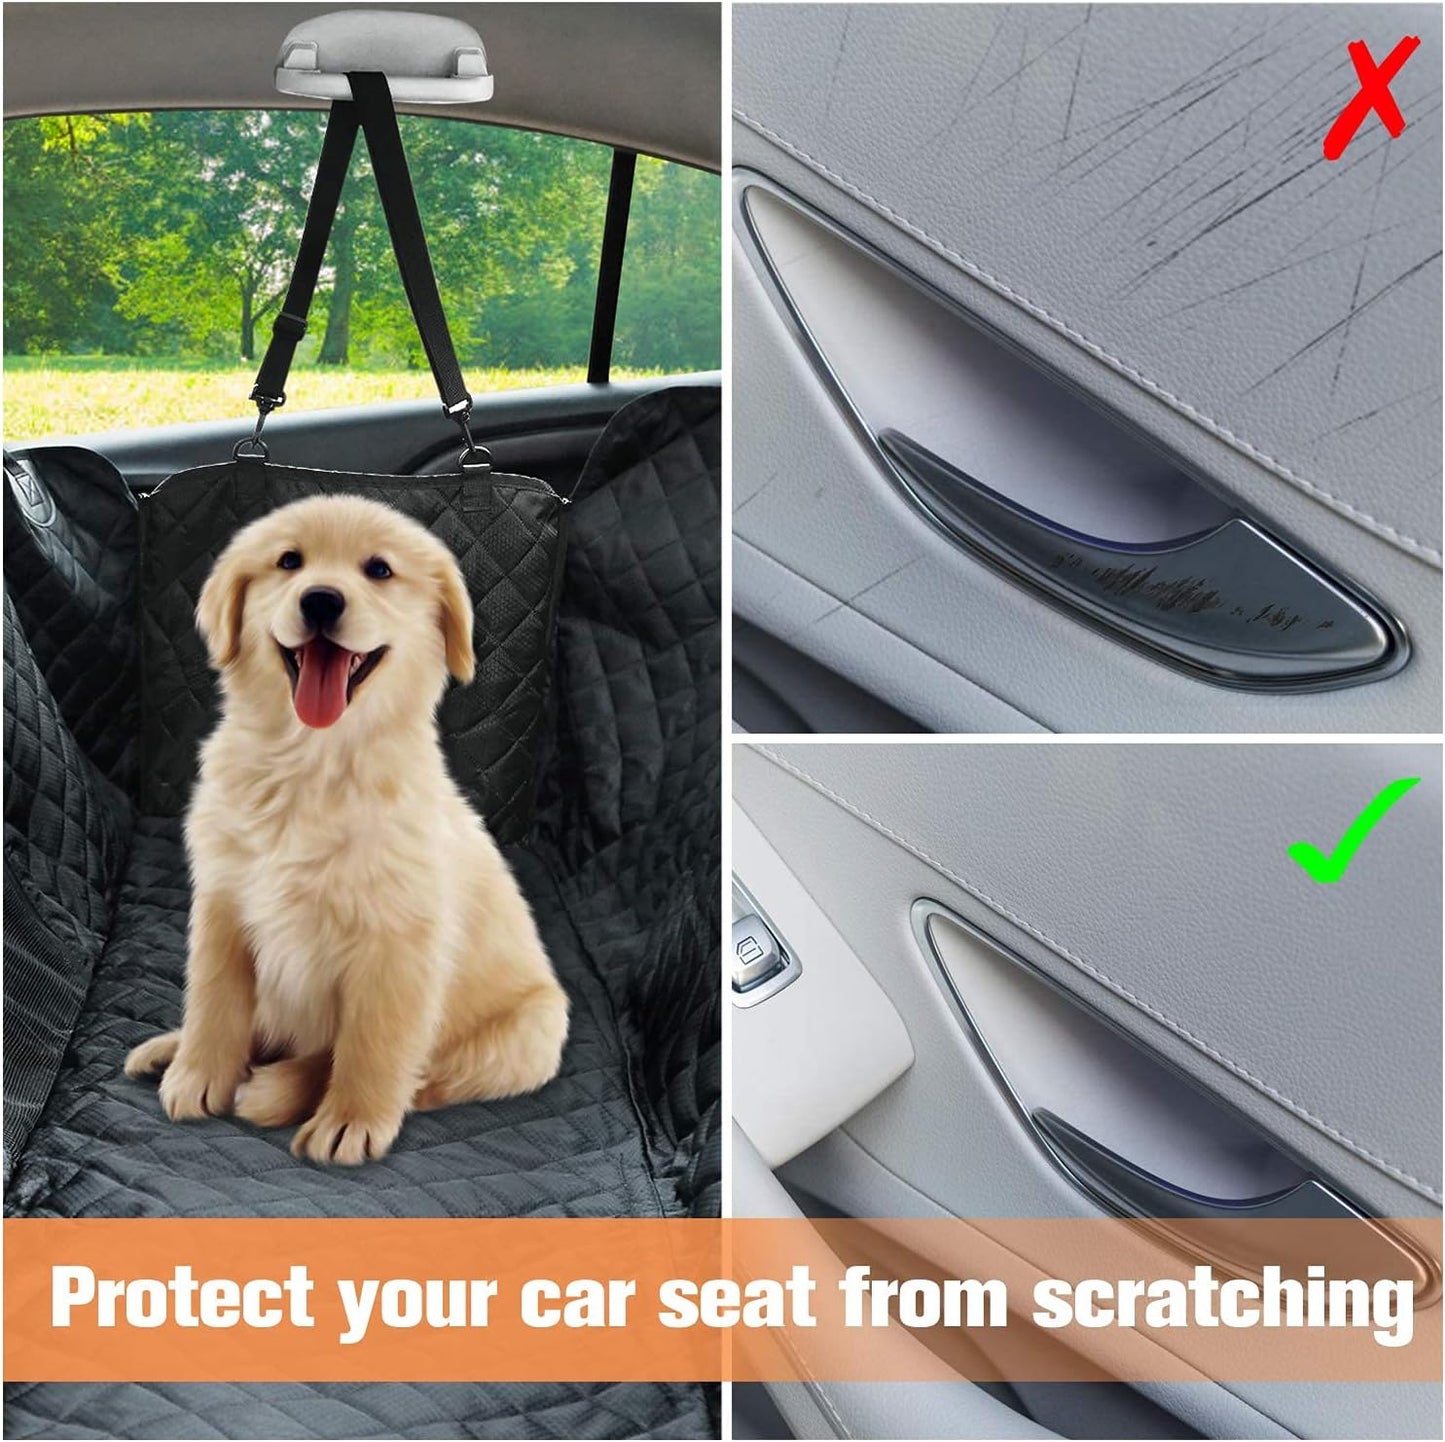 PETICON Dog Car Seat Cover for Back Seat, Waterproof Dog Seat Cover for Cars with Mesh Window, Scratchproof Back Seat Cover for Dogs, Nonslip Dog Hammock for Cars, Trucks, SUVs, Jeeps, Black